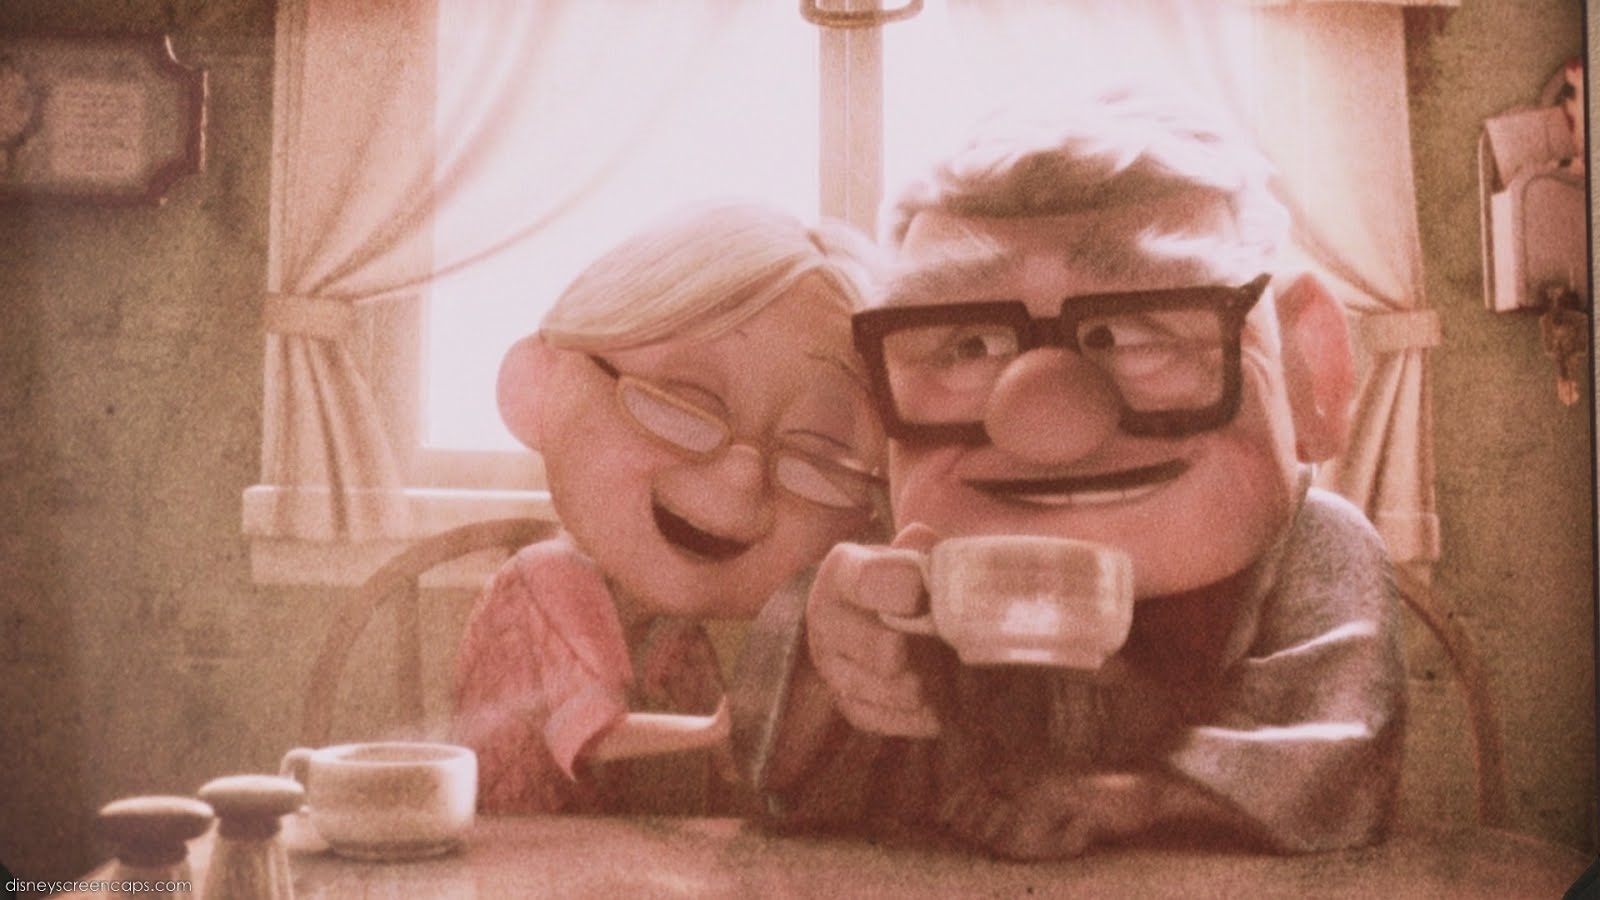 up carl and ellie wallpaper